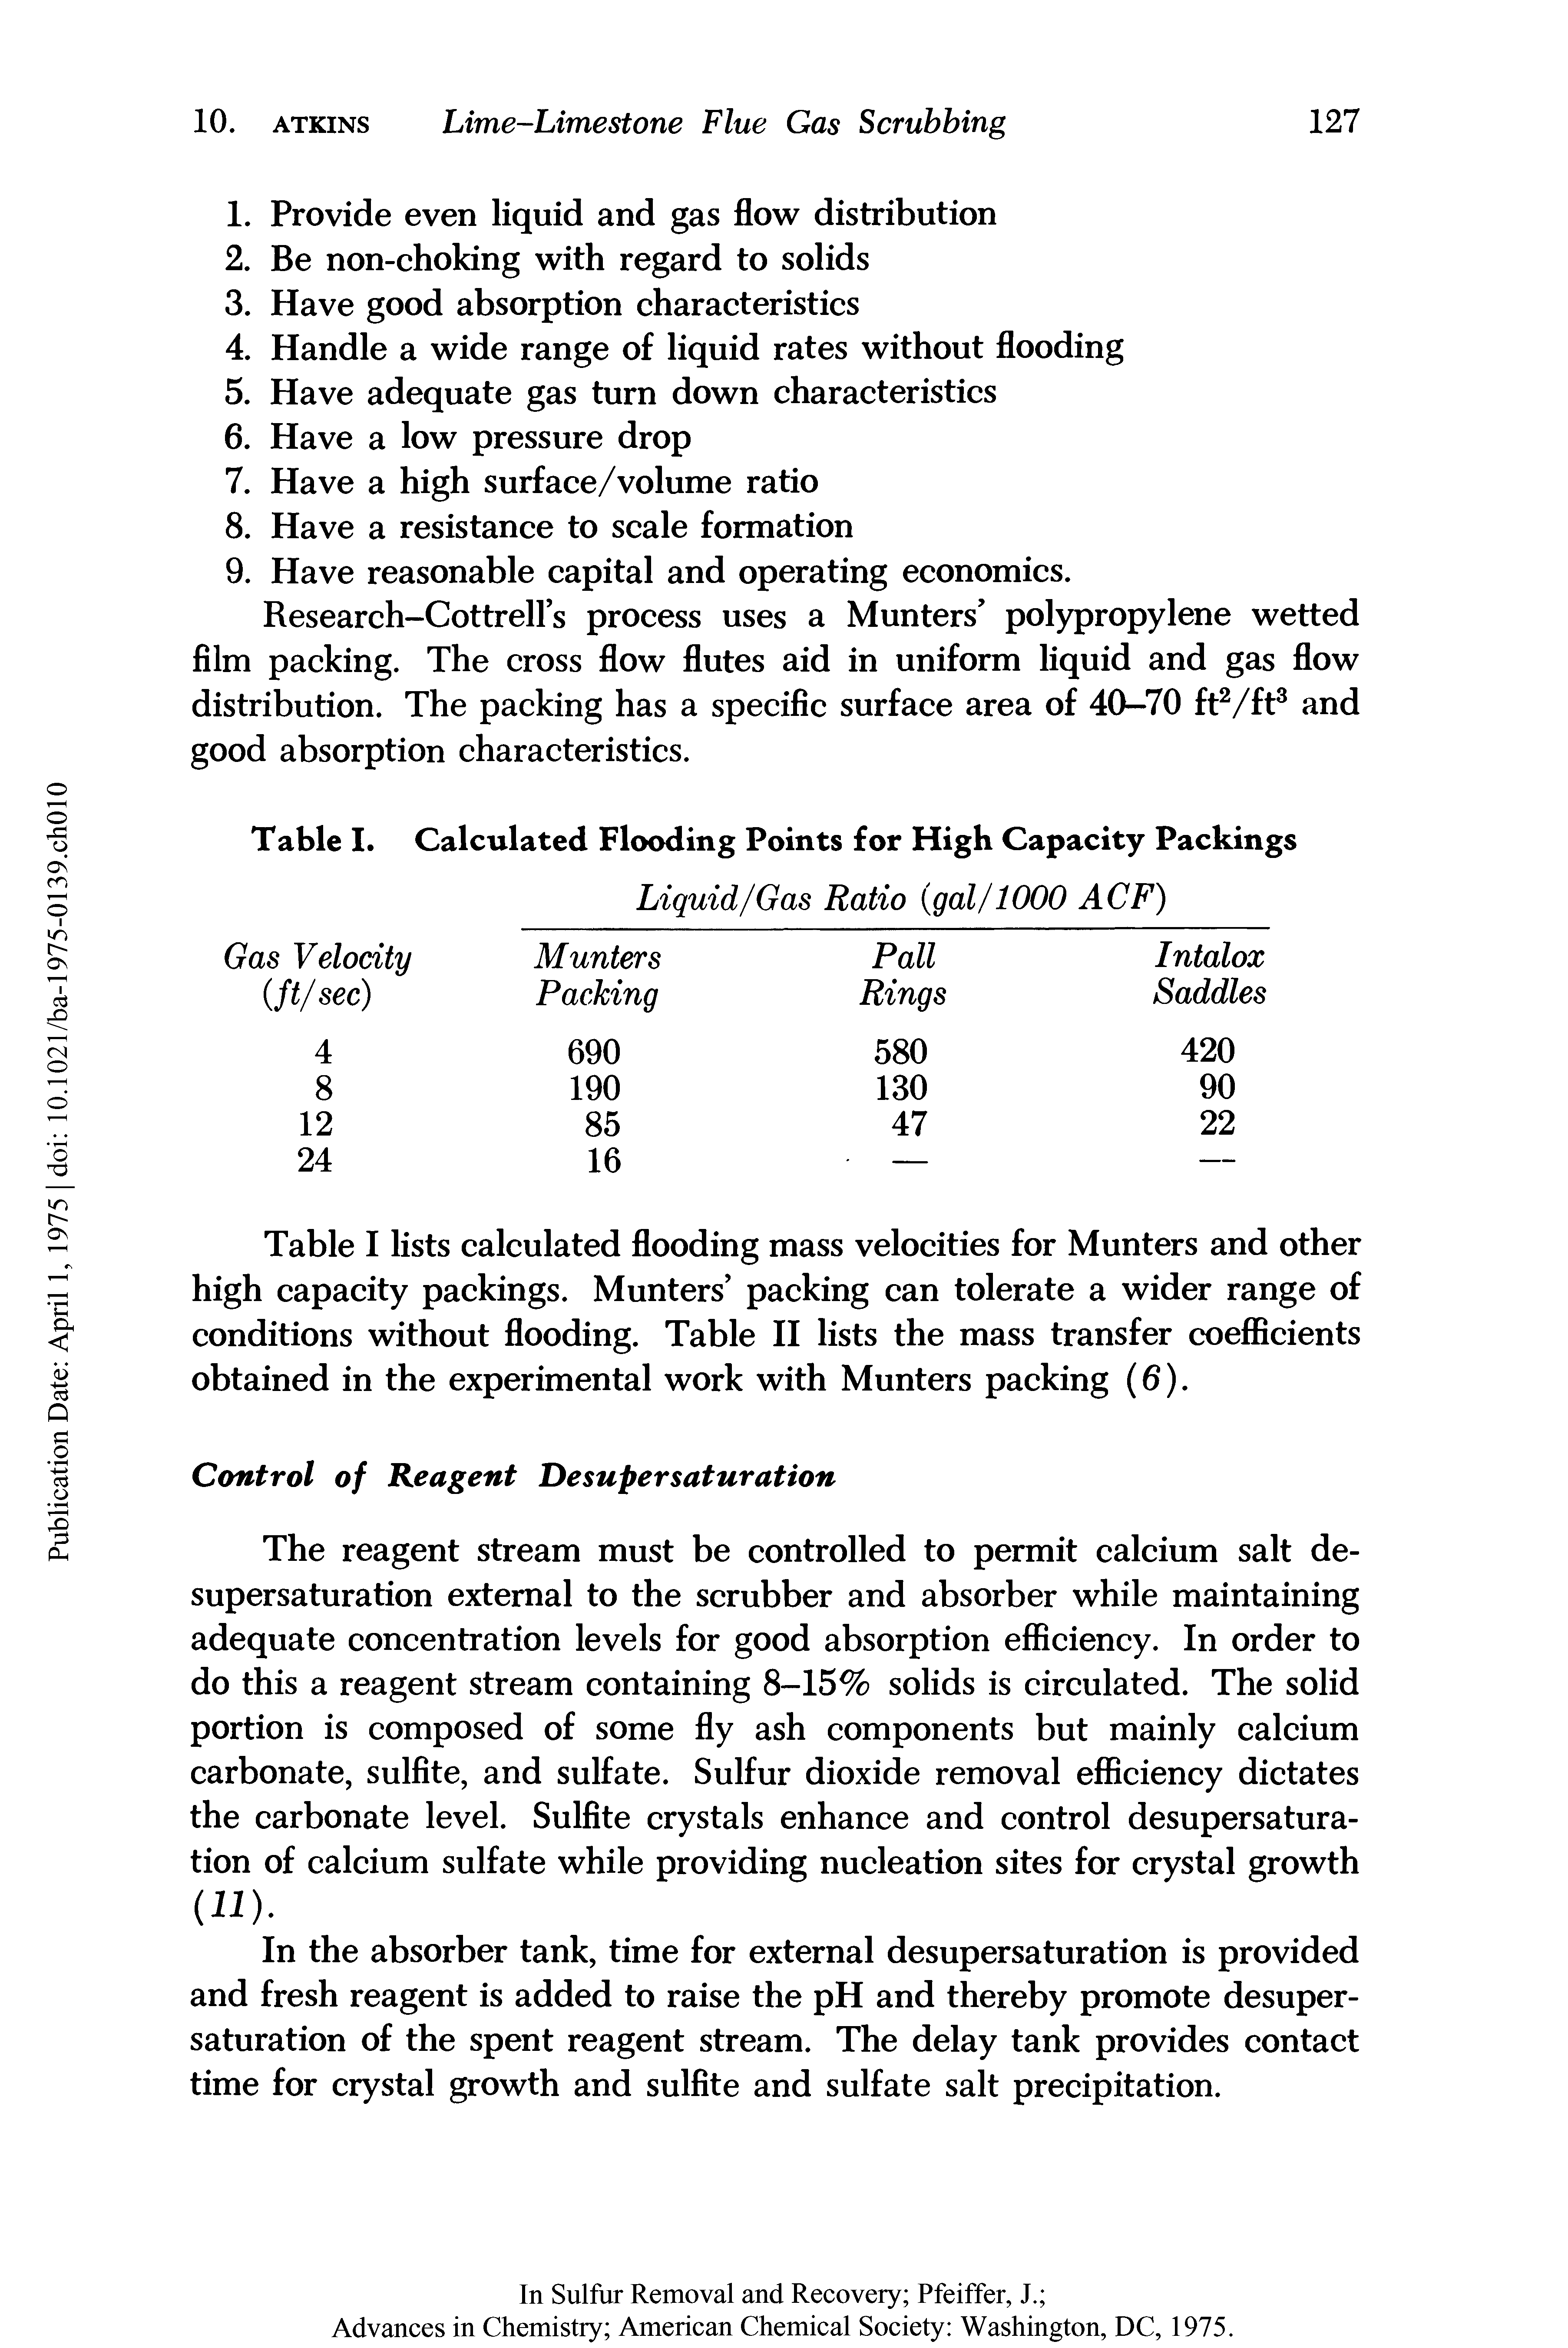 Table I. Calculated Flooding Points for High Capacity Packings...